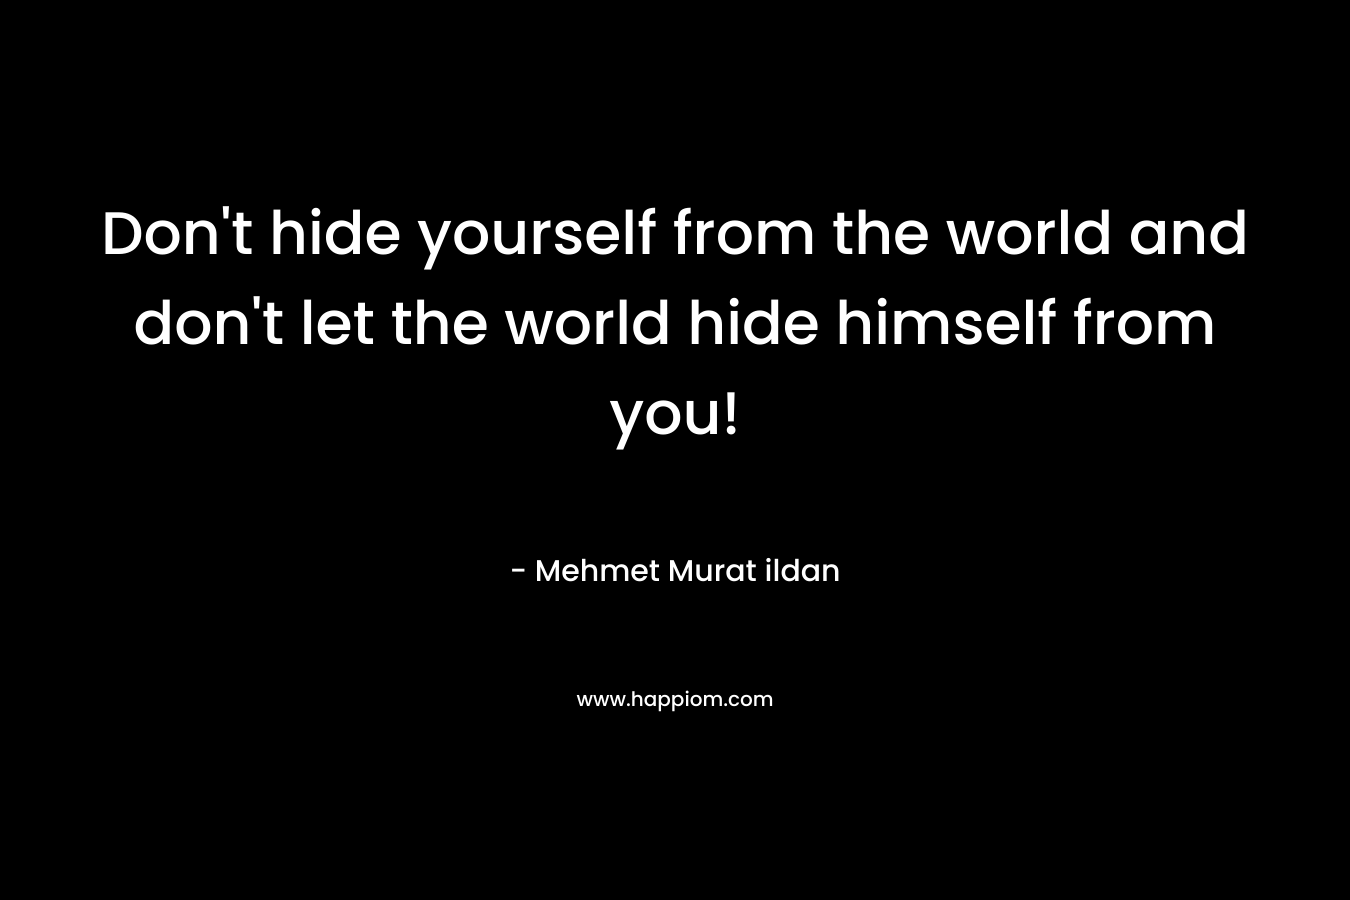 Don't hide yourself from the world and don't let the world hide himself from you!